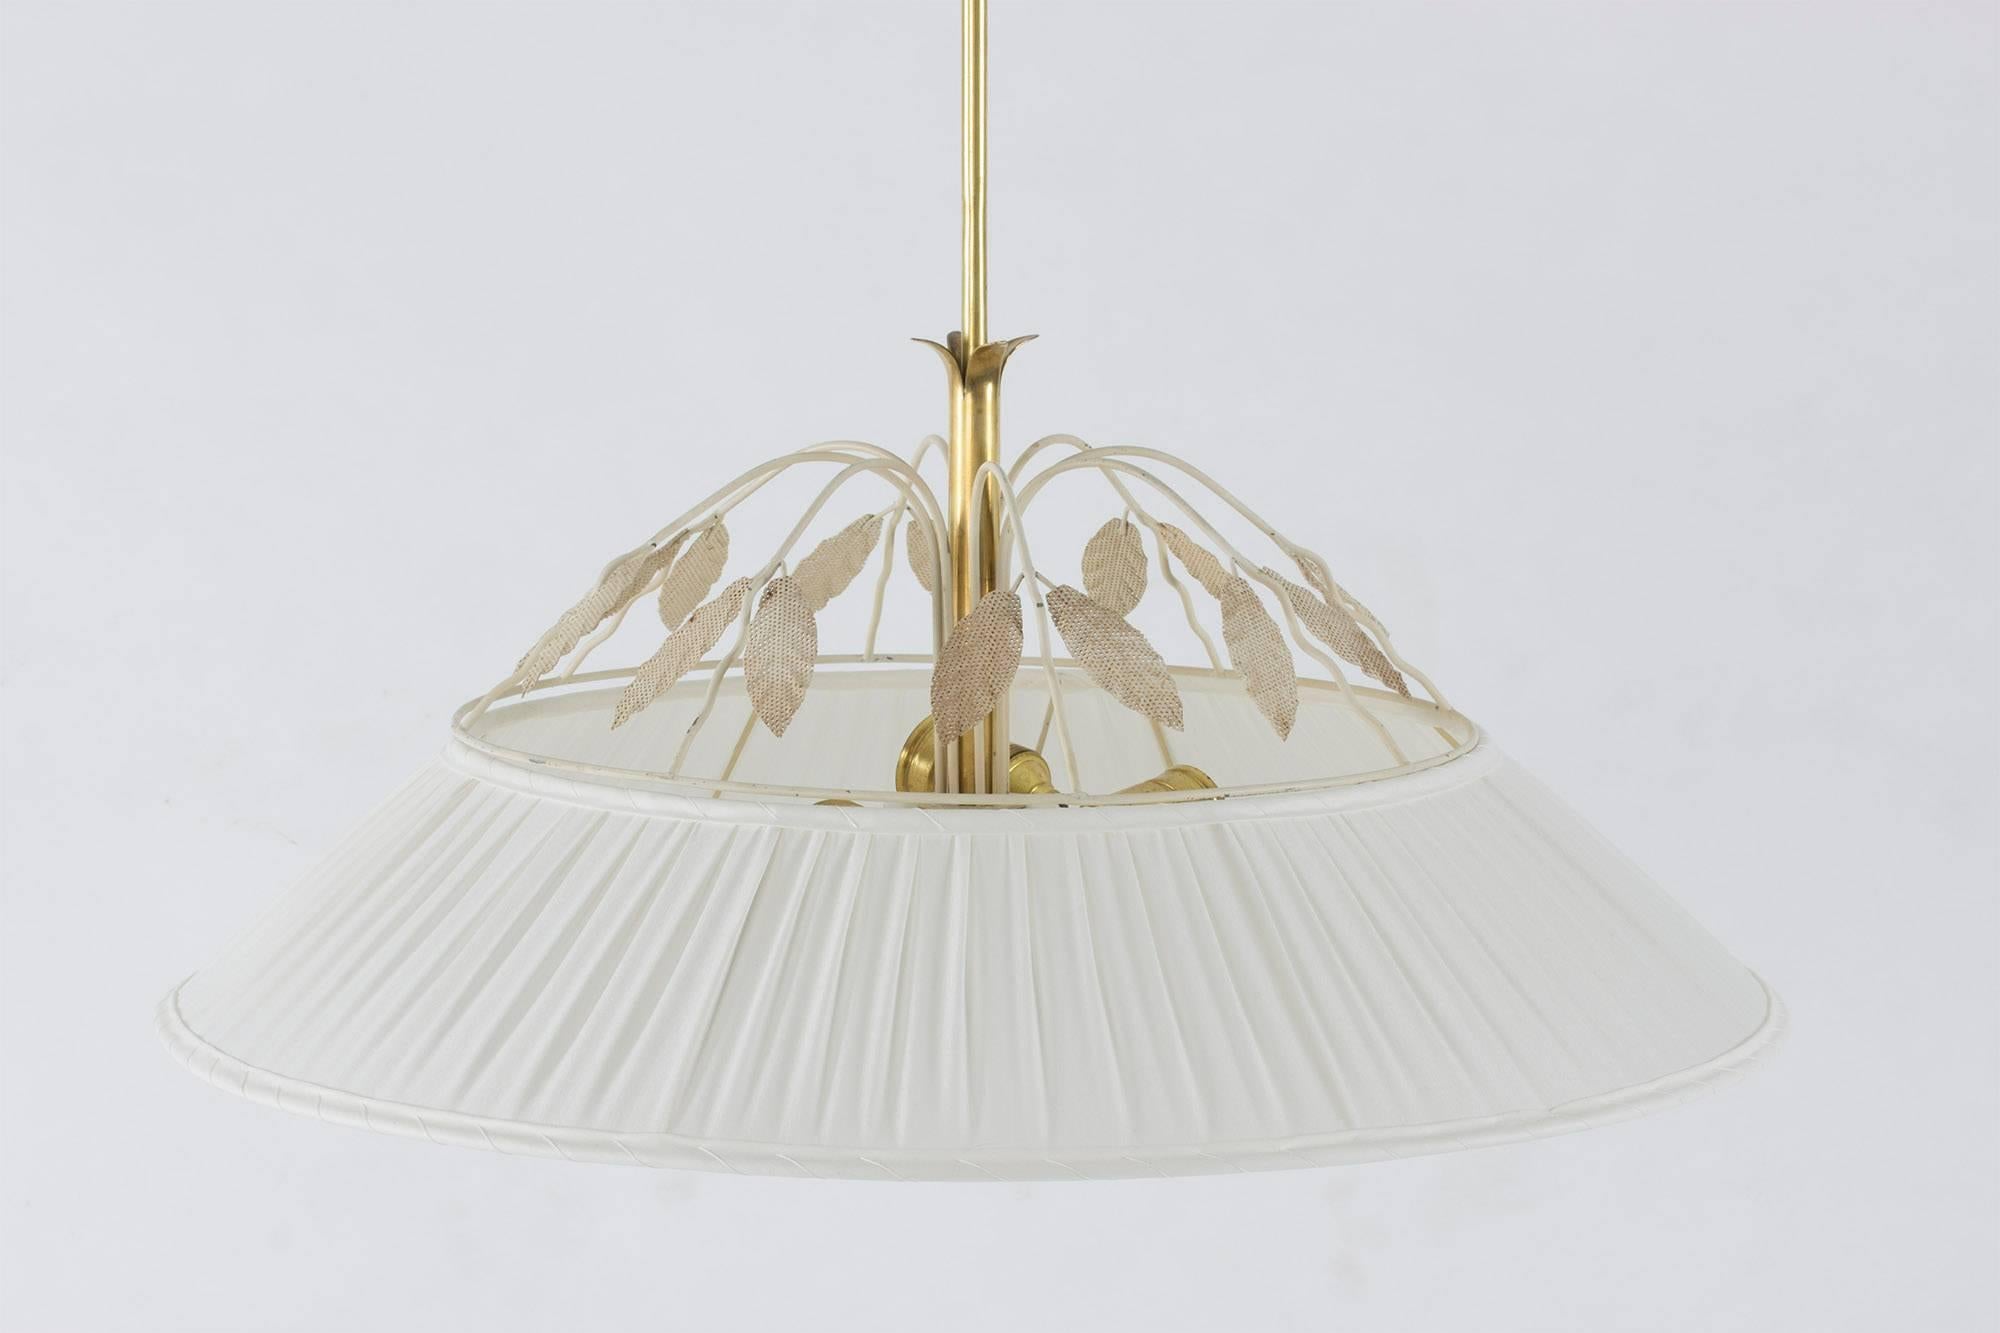 Exquisite ceiling lamp by Hans Bergström with a brass pole and cup and a lacquered metal frame dressed with white silk. The light source is shielded by a convex opaline glass disk in the bottom of the lamp and the top is crowned by a decor of metal